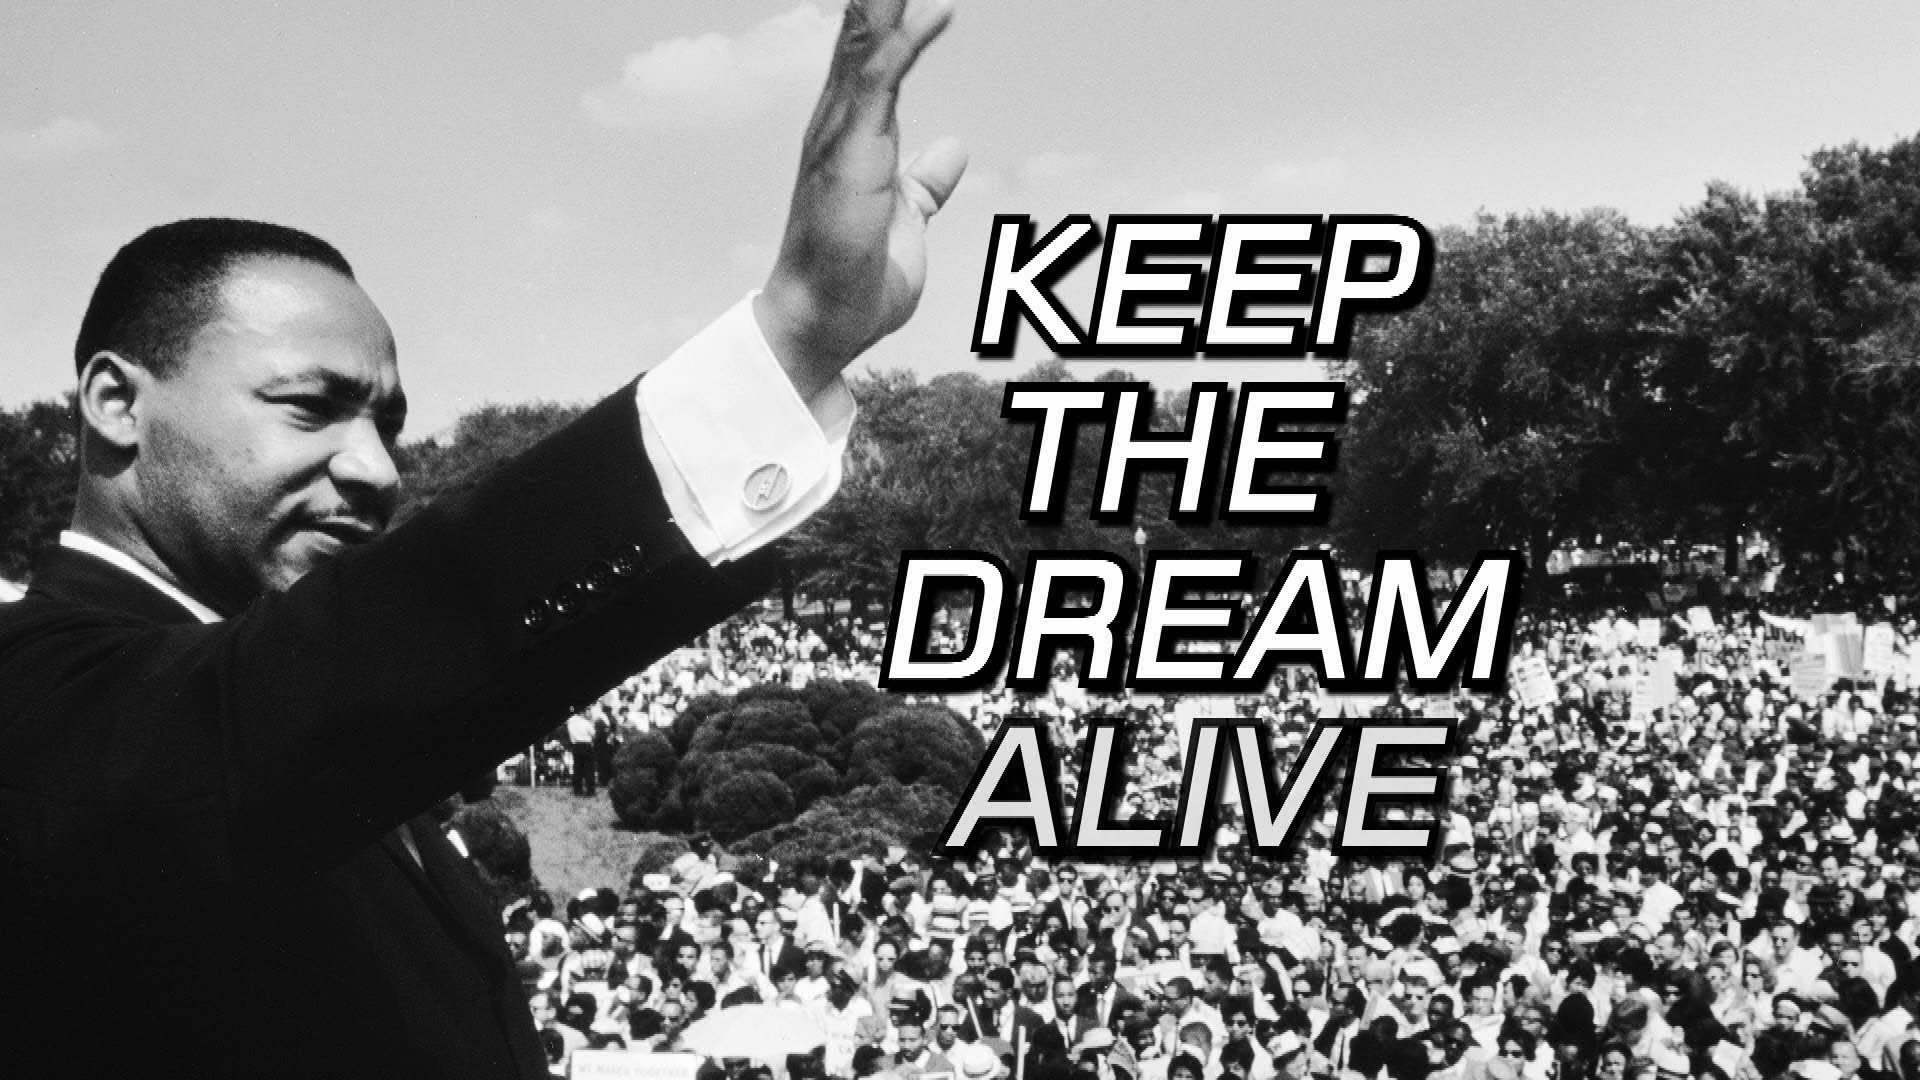 10 Things To Think About On Martin Luther King Jr. Day | Odyssey